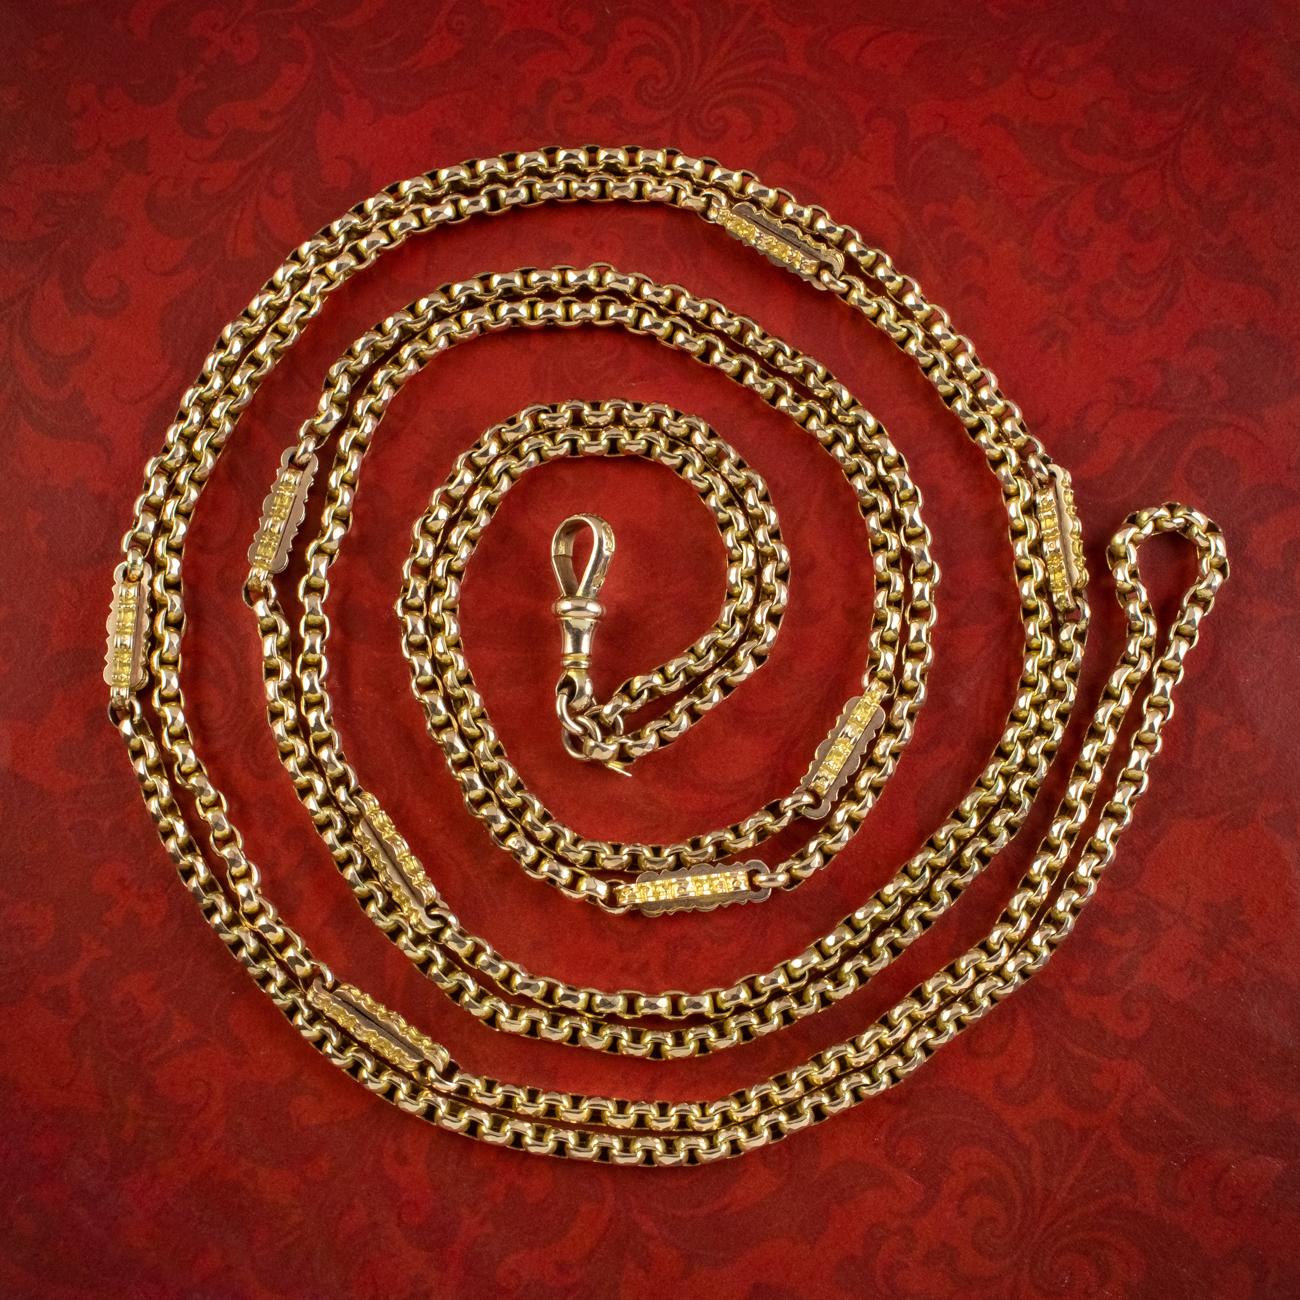 A grand antique Victorian guard chain from the late 19th Century made up of faceted cable links and fancy, interlocked links with jagged edges which lead to the claw clasp at the bottom. It’s all modelled in a bright 9ct yellow gold and has